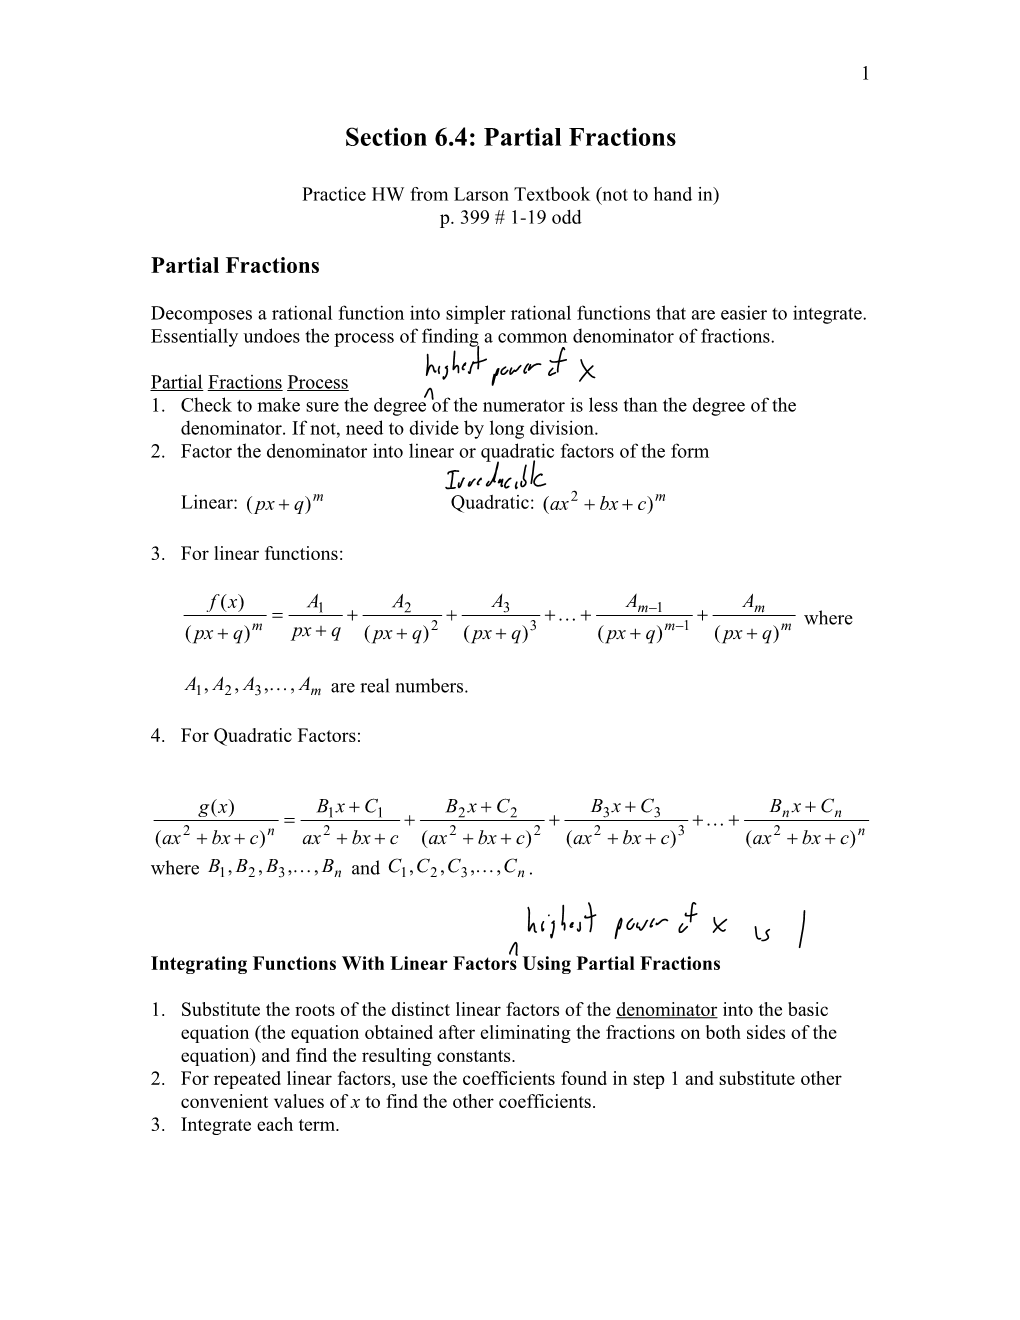 Section 6.4: Partial Fractions